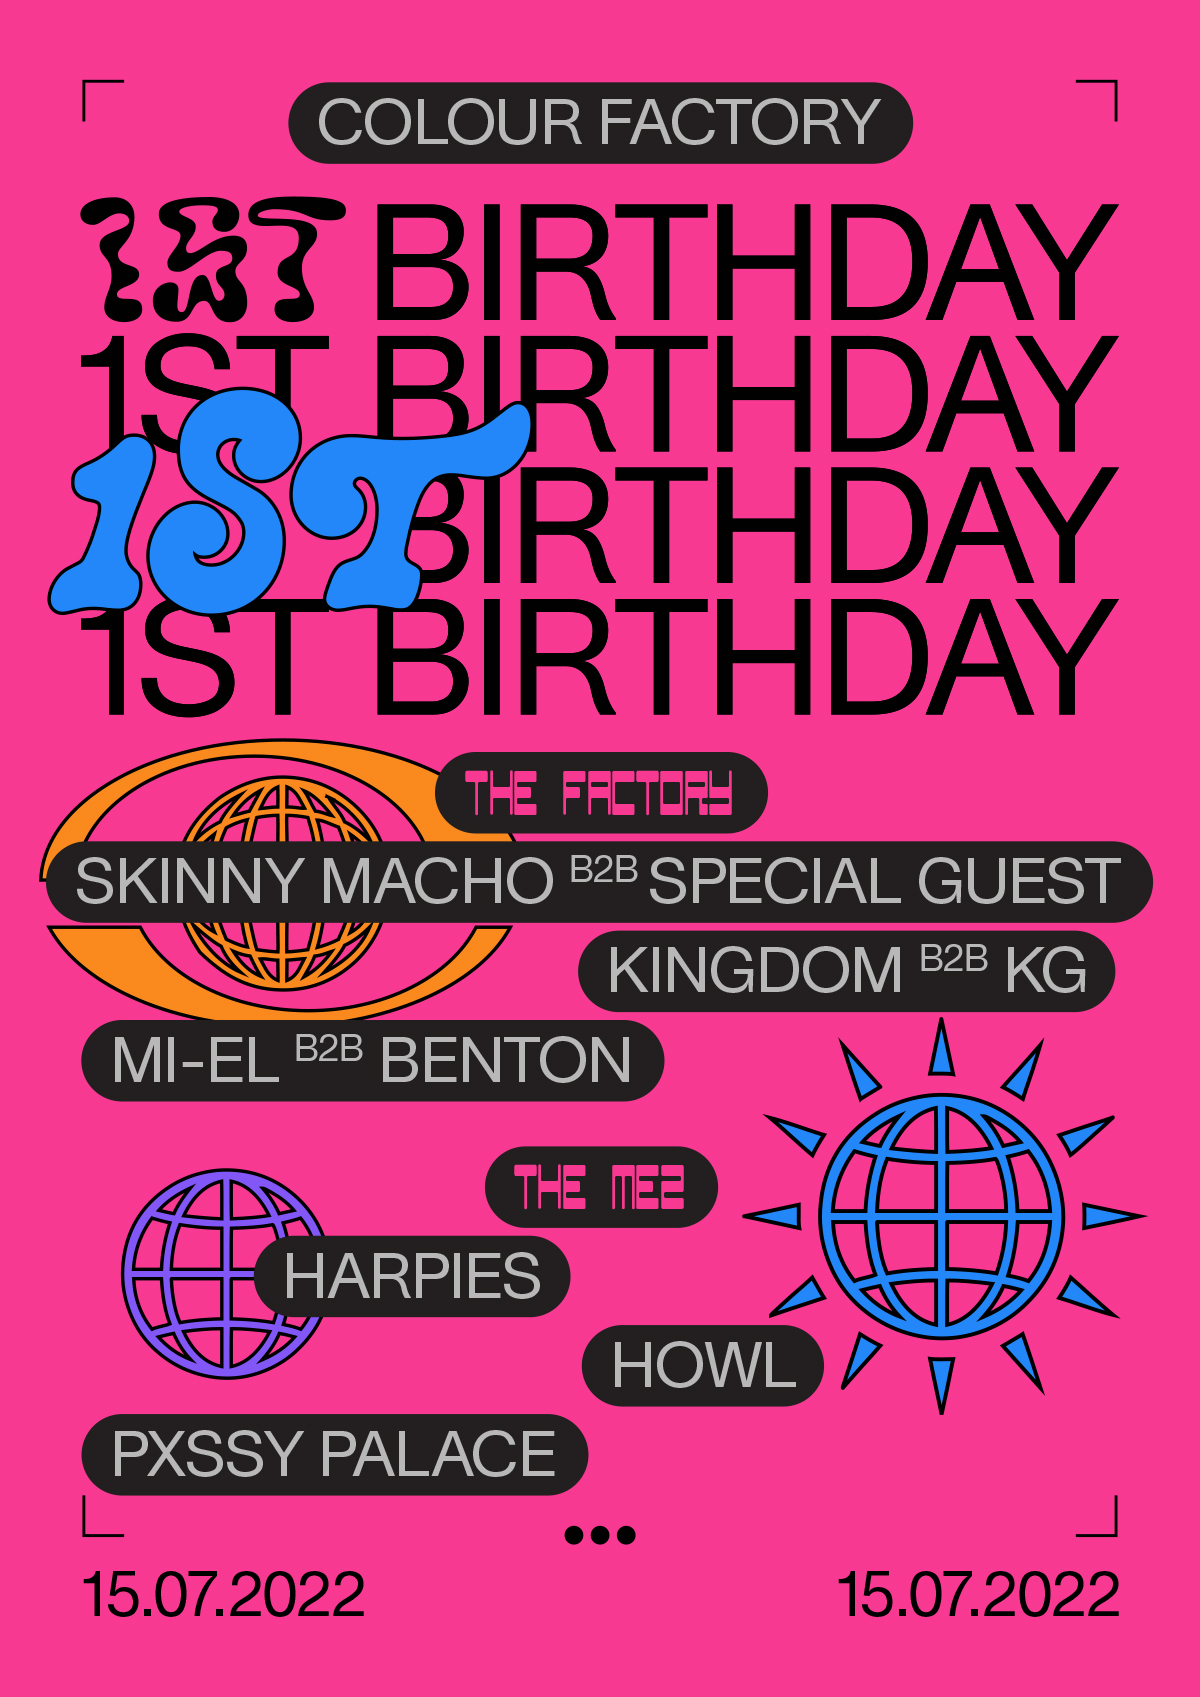 Colour Factory 1st Birthday - Flyer front